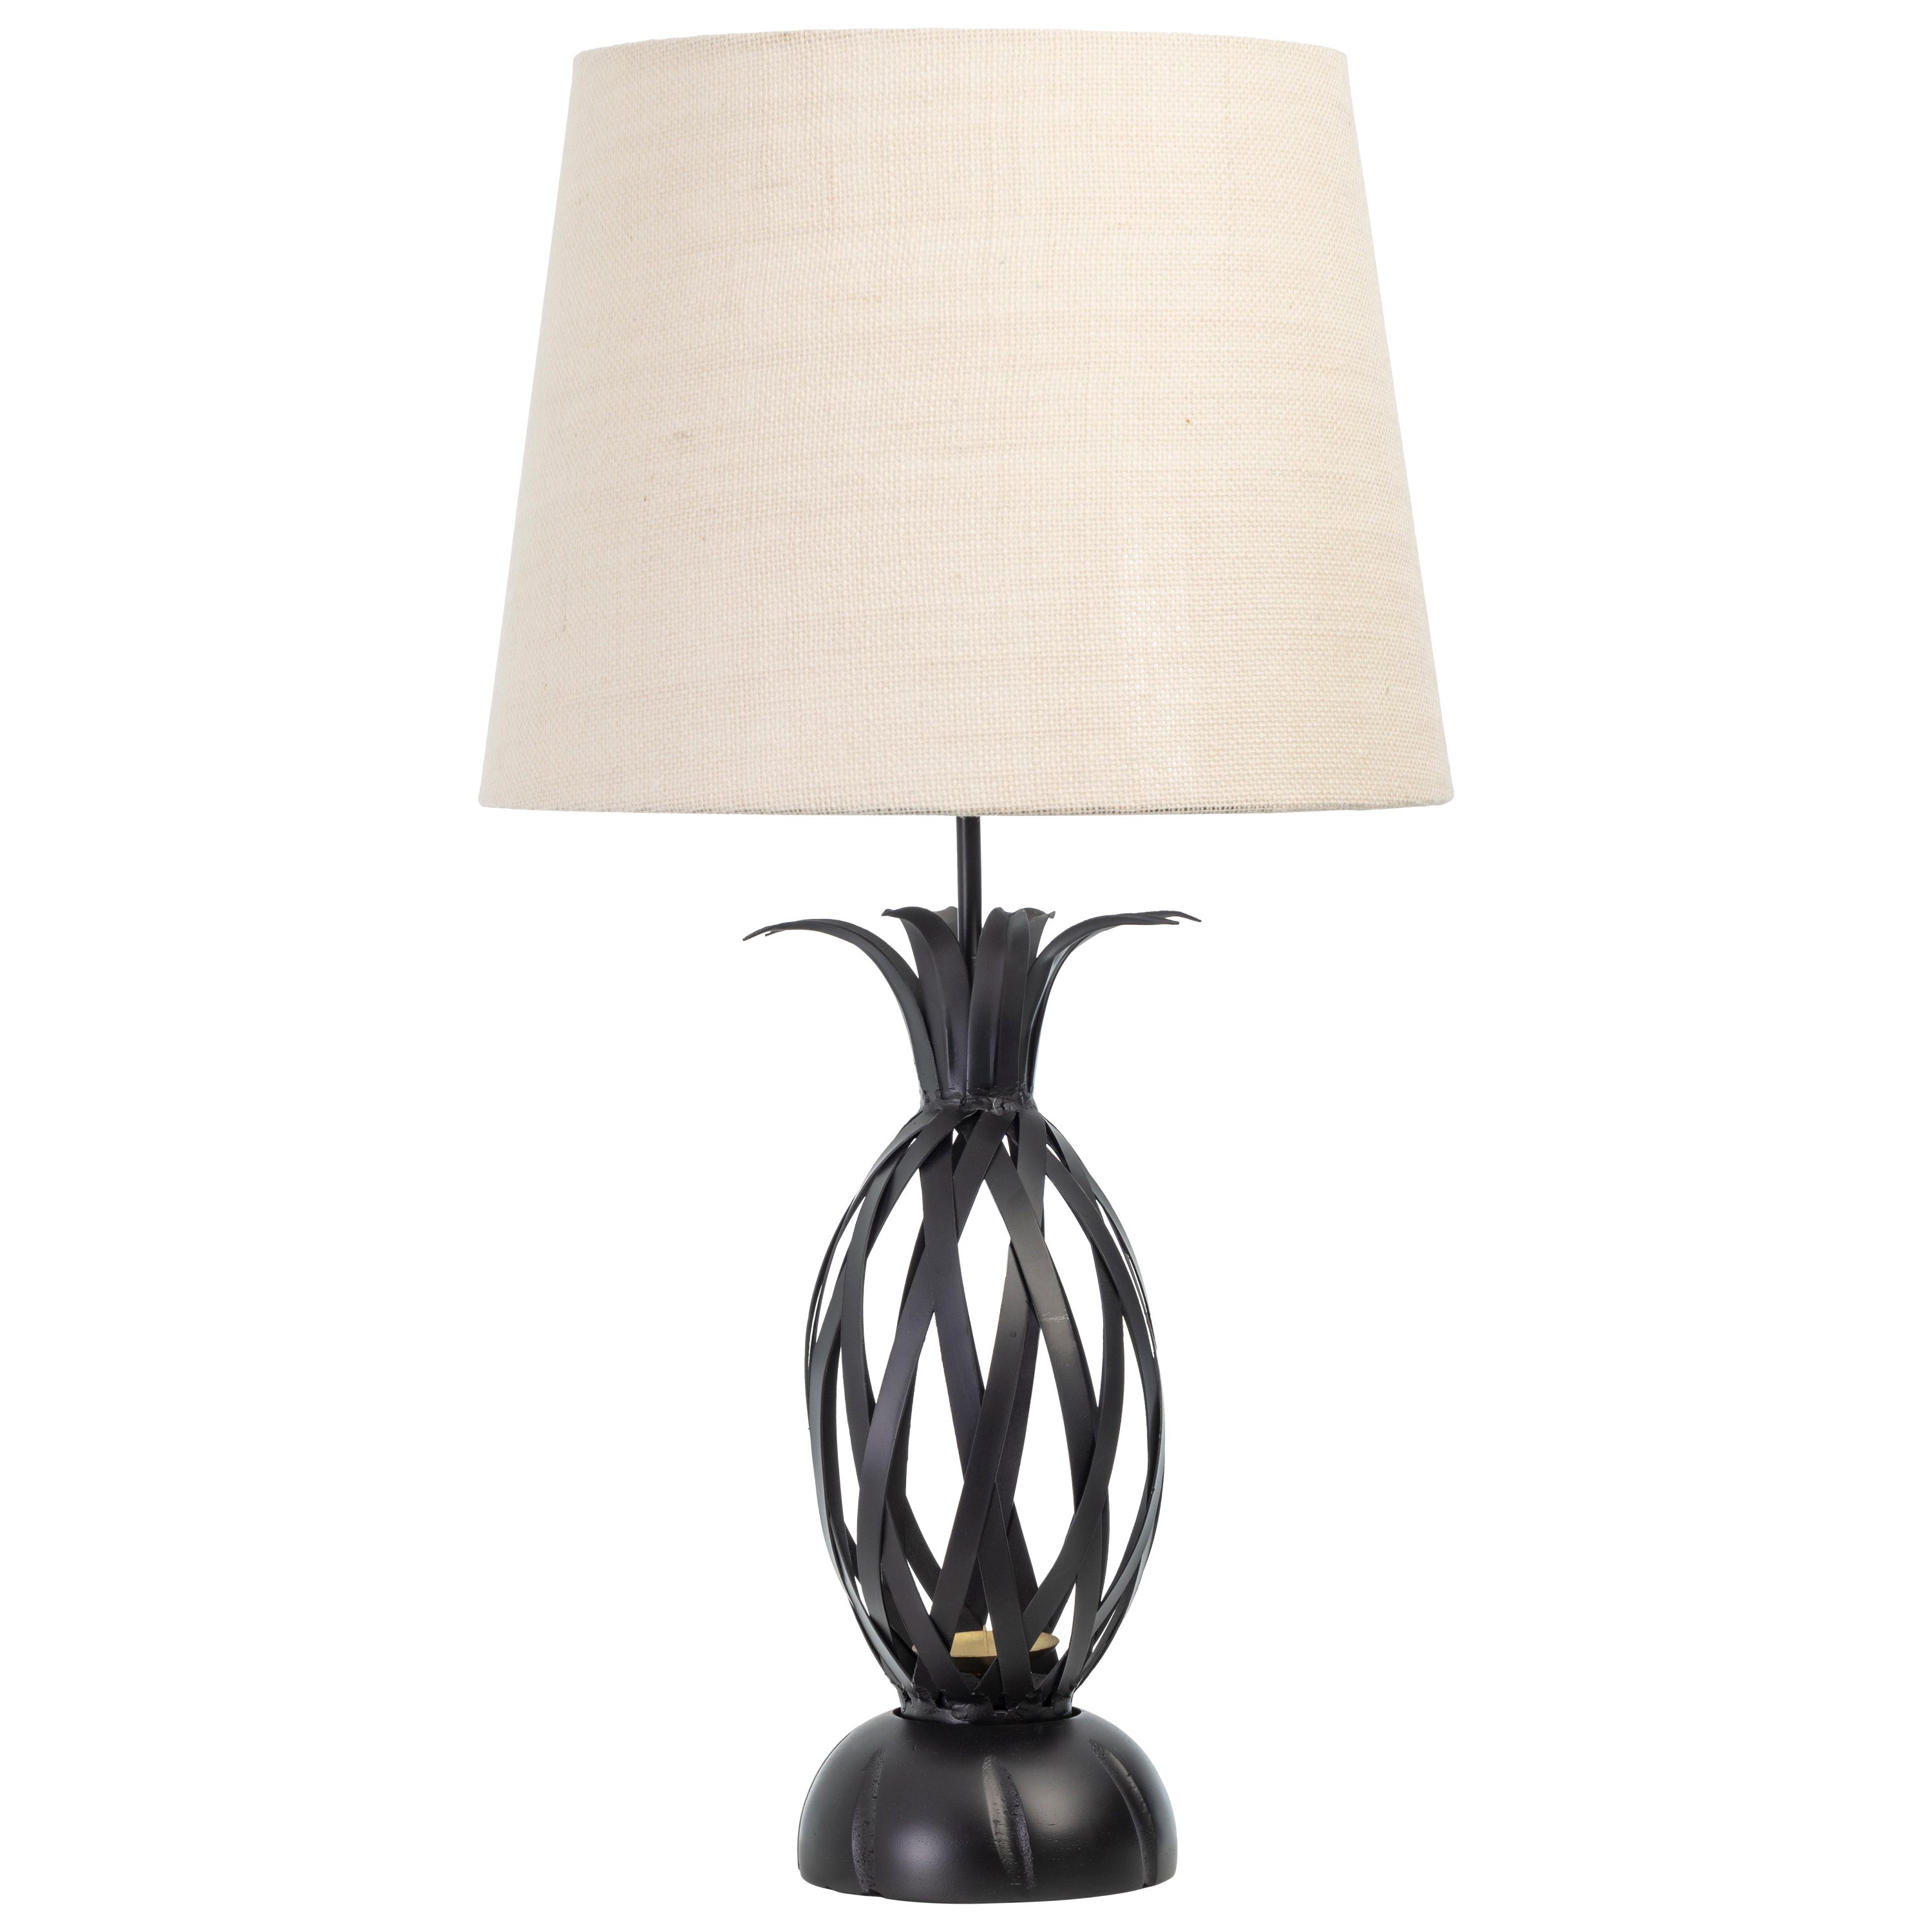 Pinapple table lamp For Sale